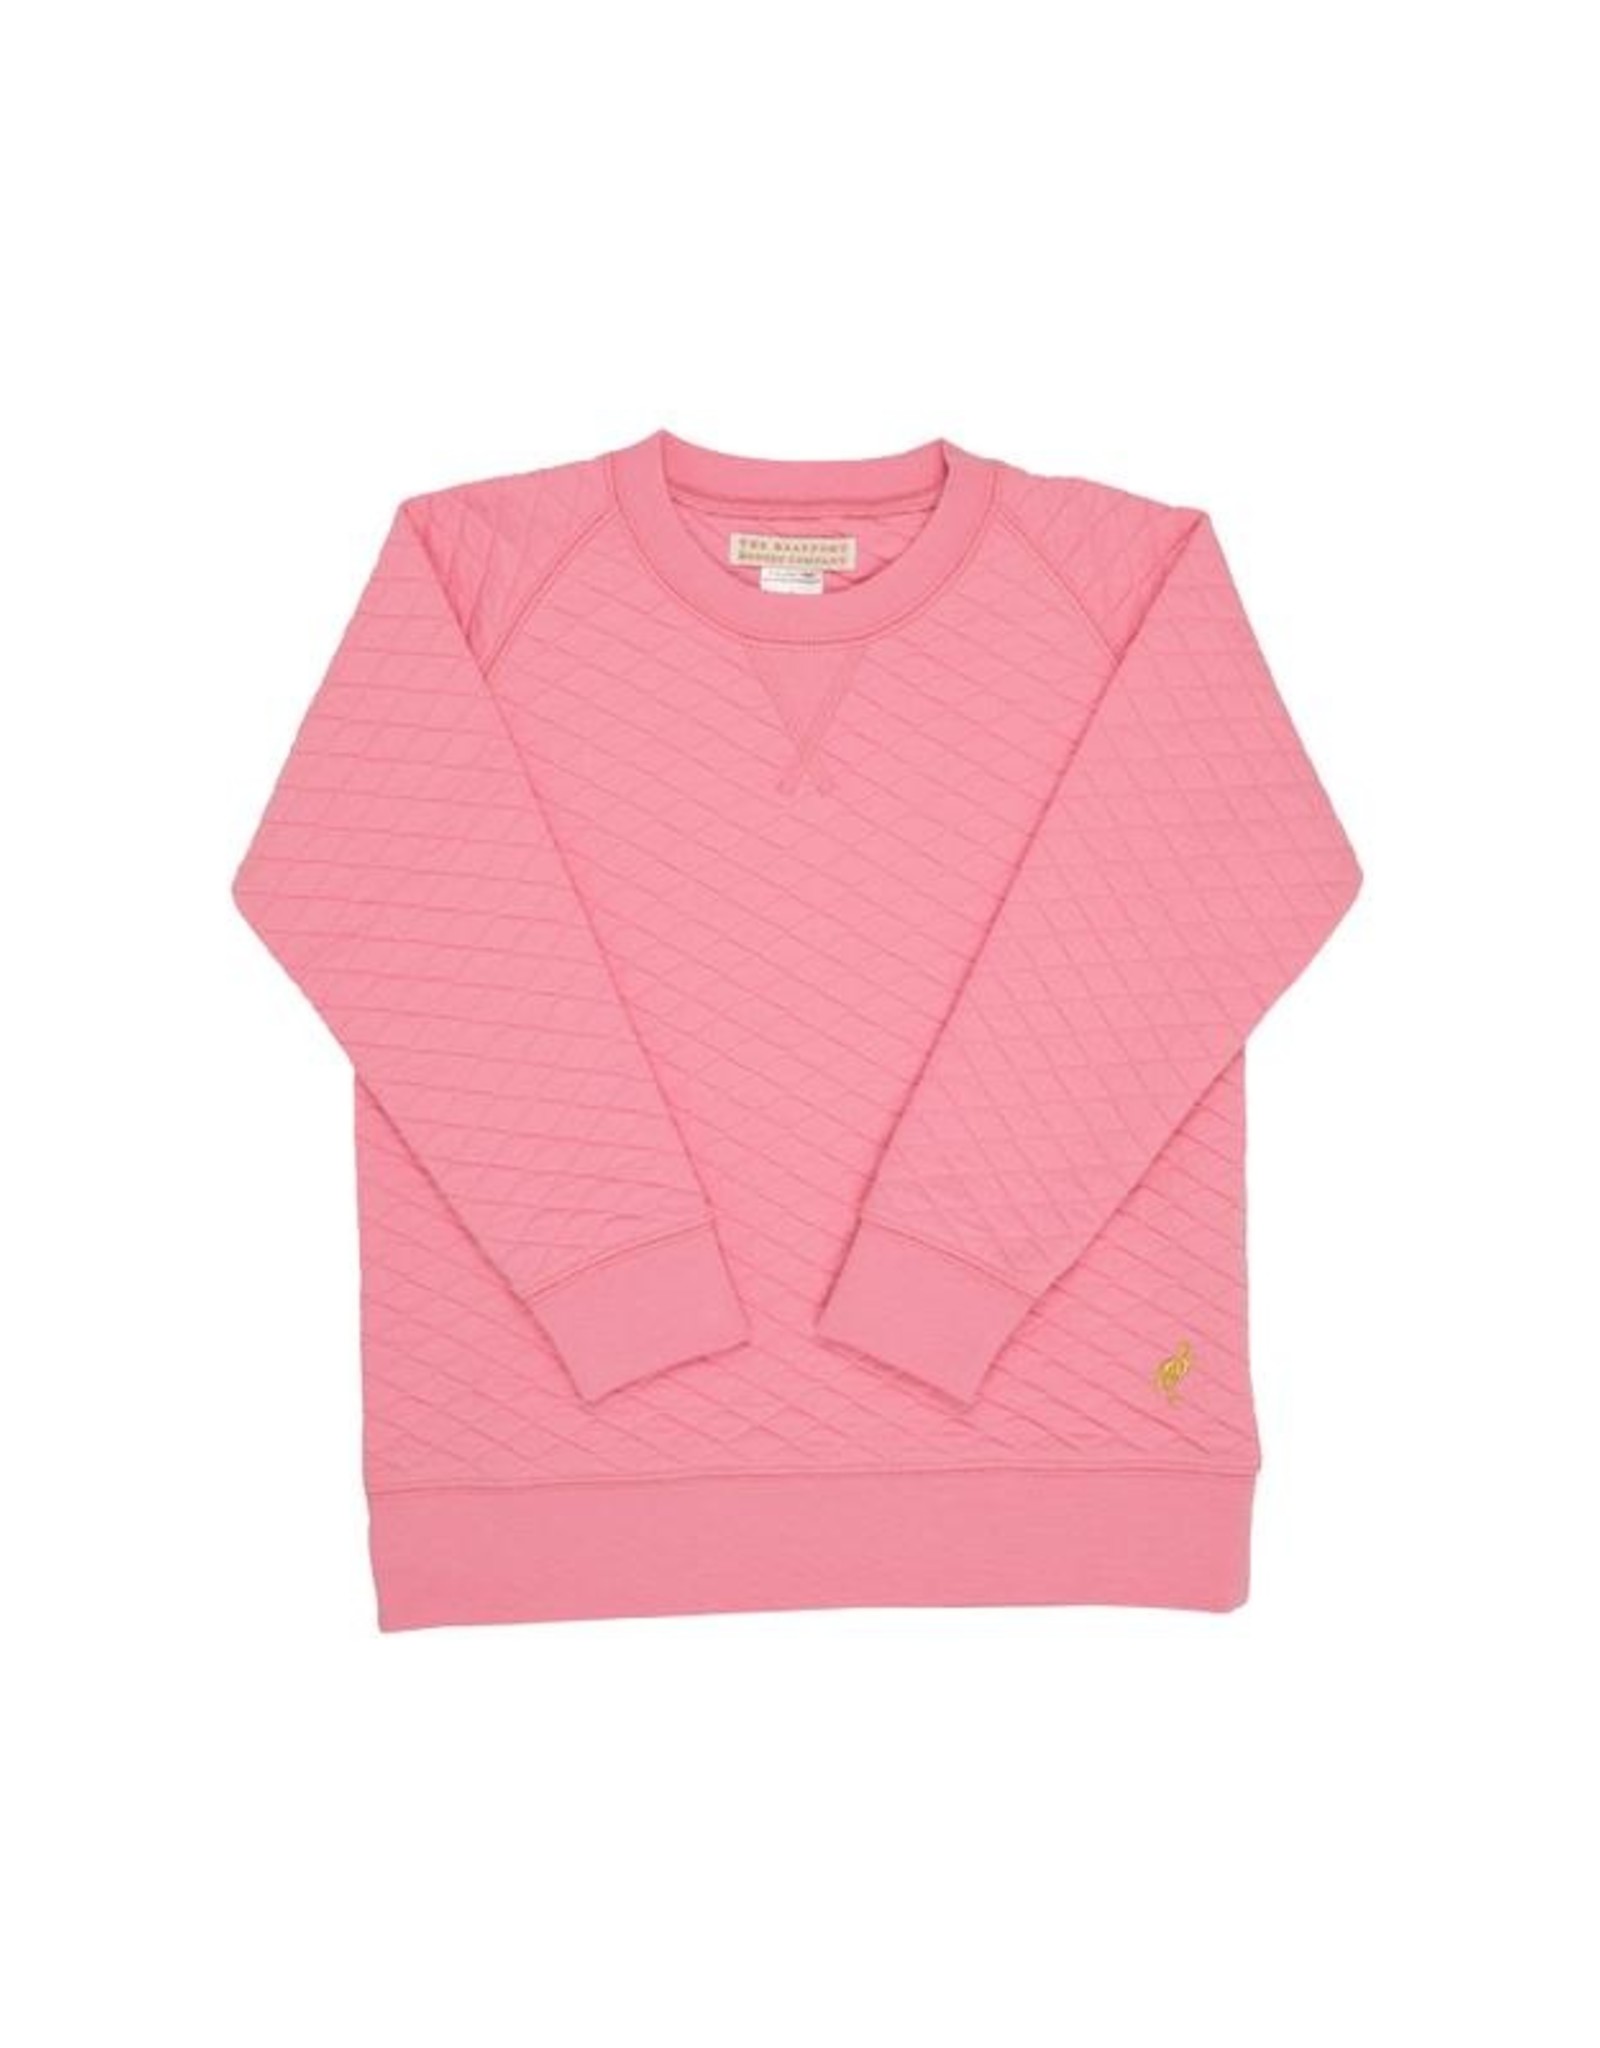 The Beaufort Bonnet Company Cassidy Comfy Crewneck Quilted, Hamptons Hot Pink